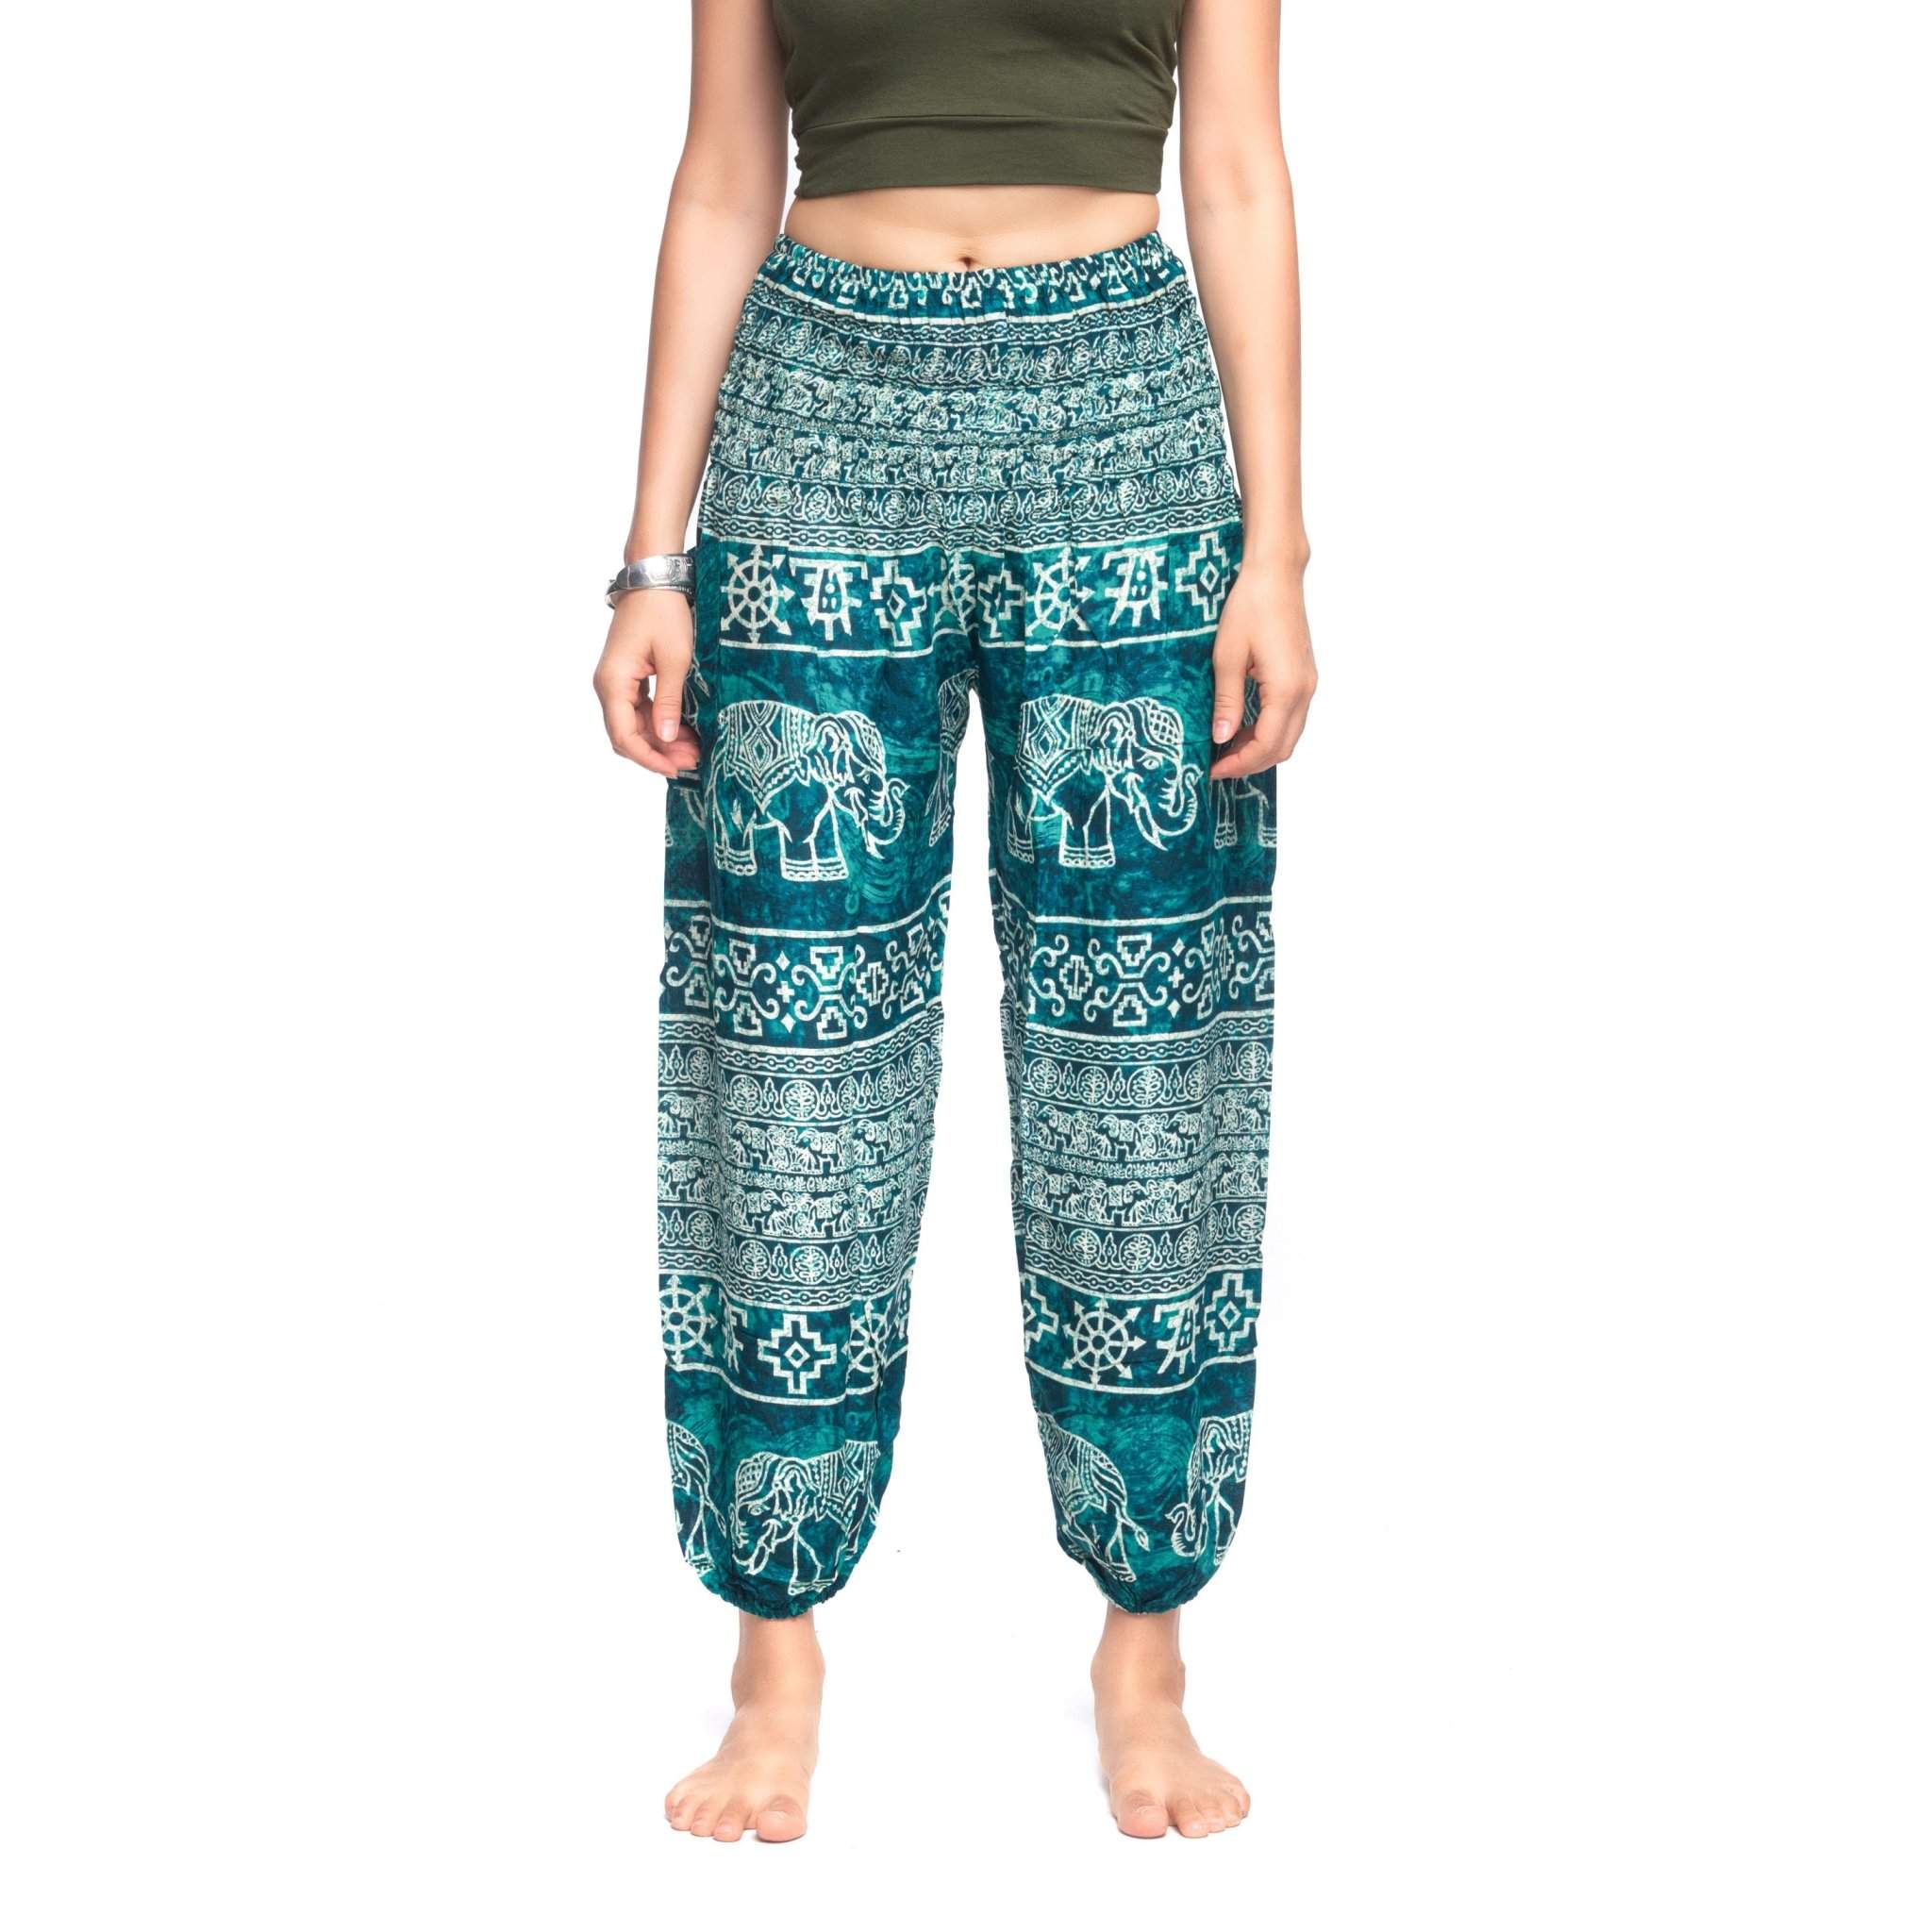 Colombo Pants Elepanta Women's Pants - Buy Today Elephant Pants Jewelry And Bohemian Clothes Handmade In Thailand Help To Save The Elephants FairTrade And Vegan